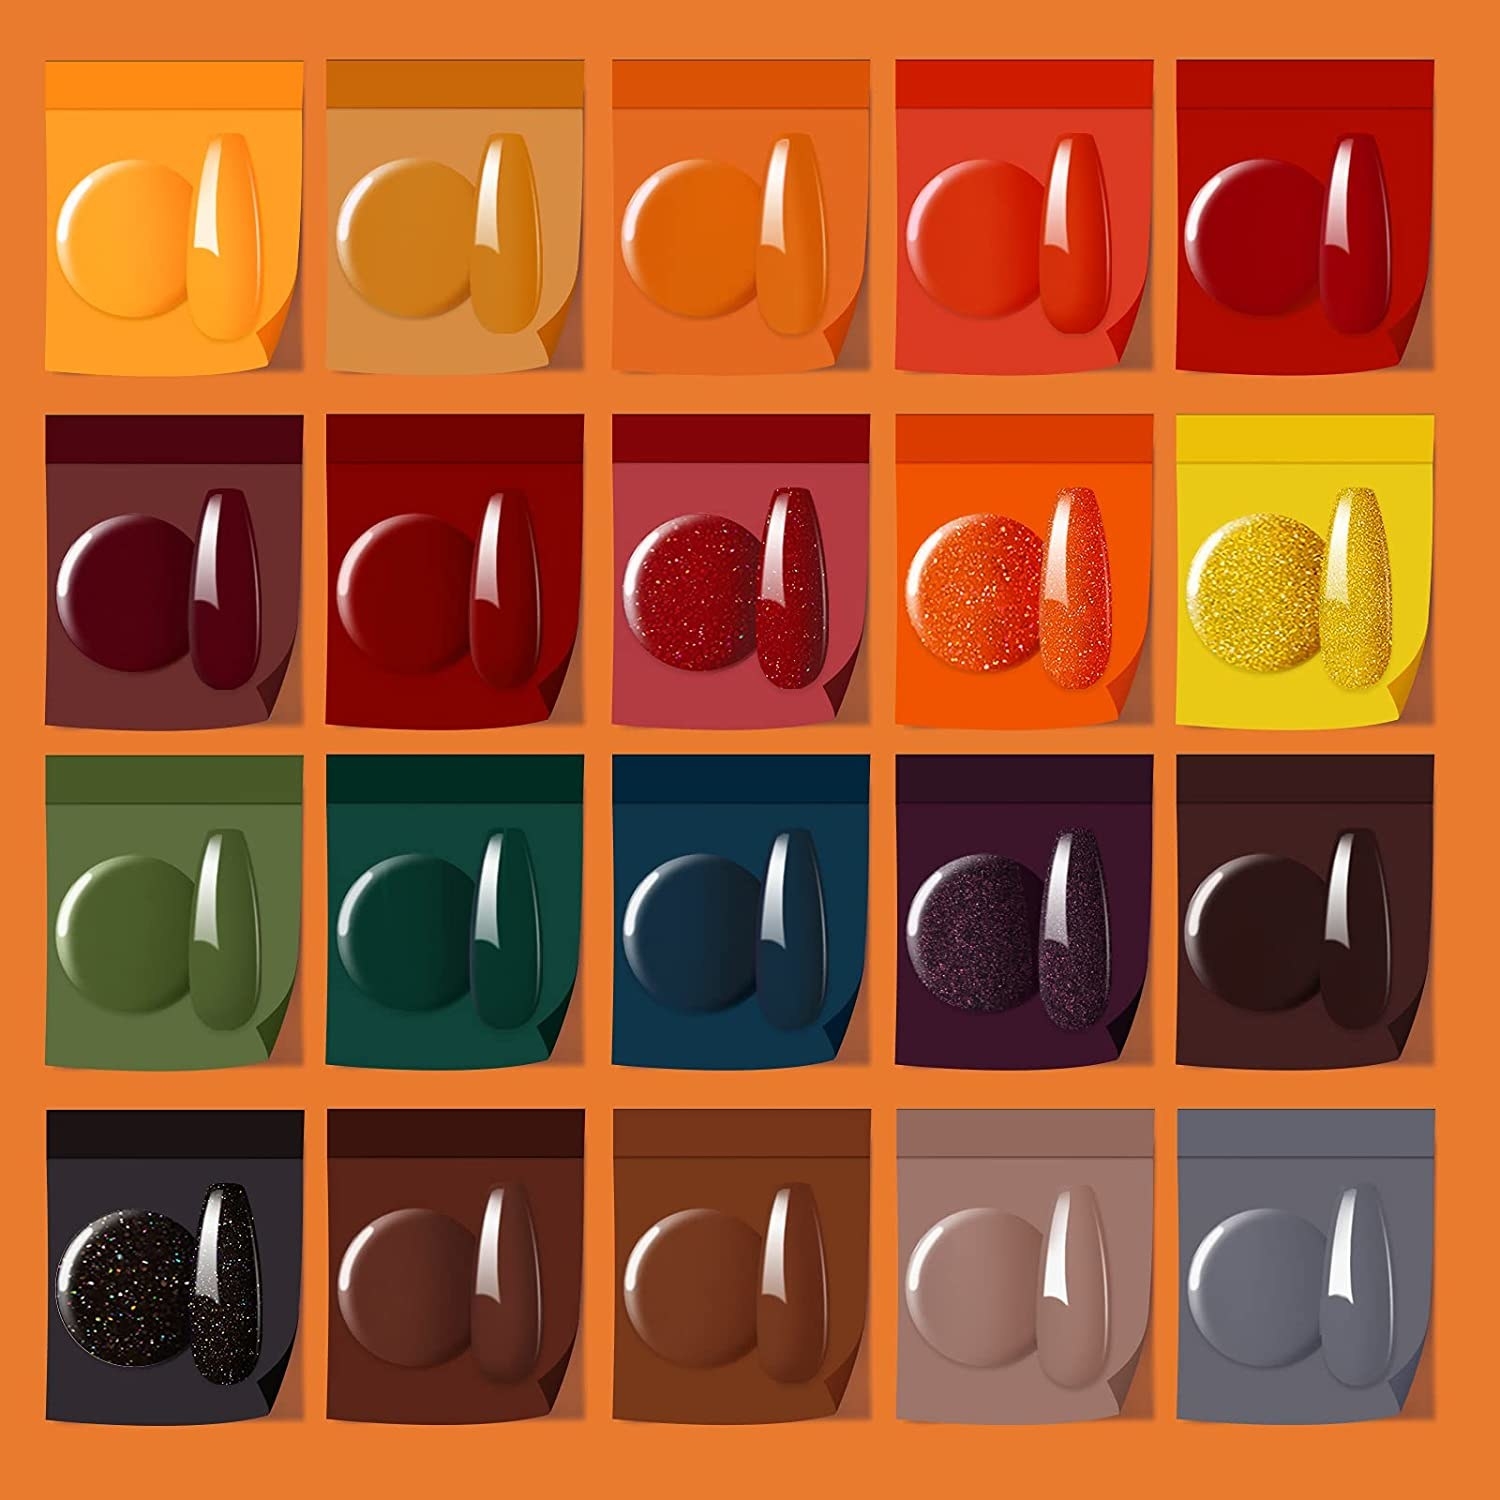 Swatches of 20 fall-inspired nail polish colors on an orange background